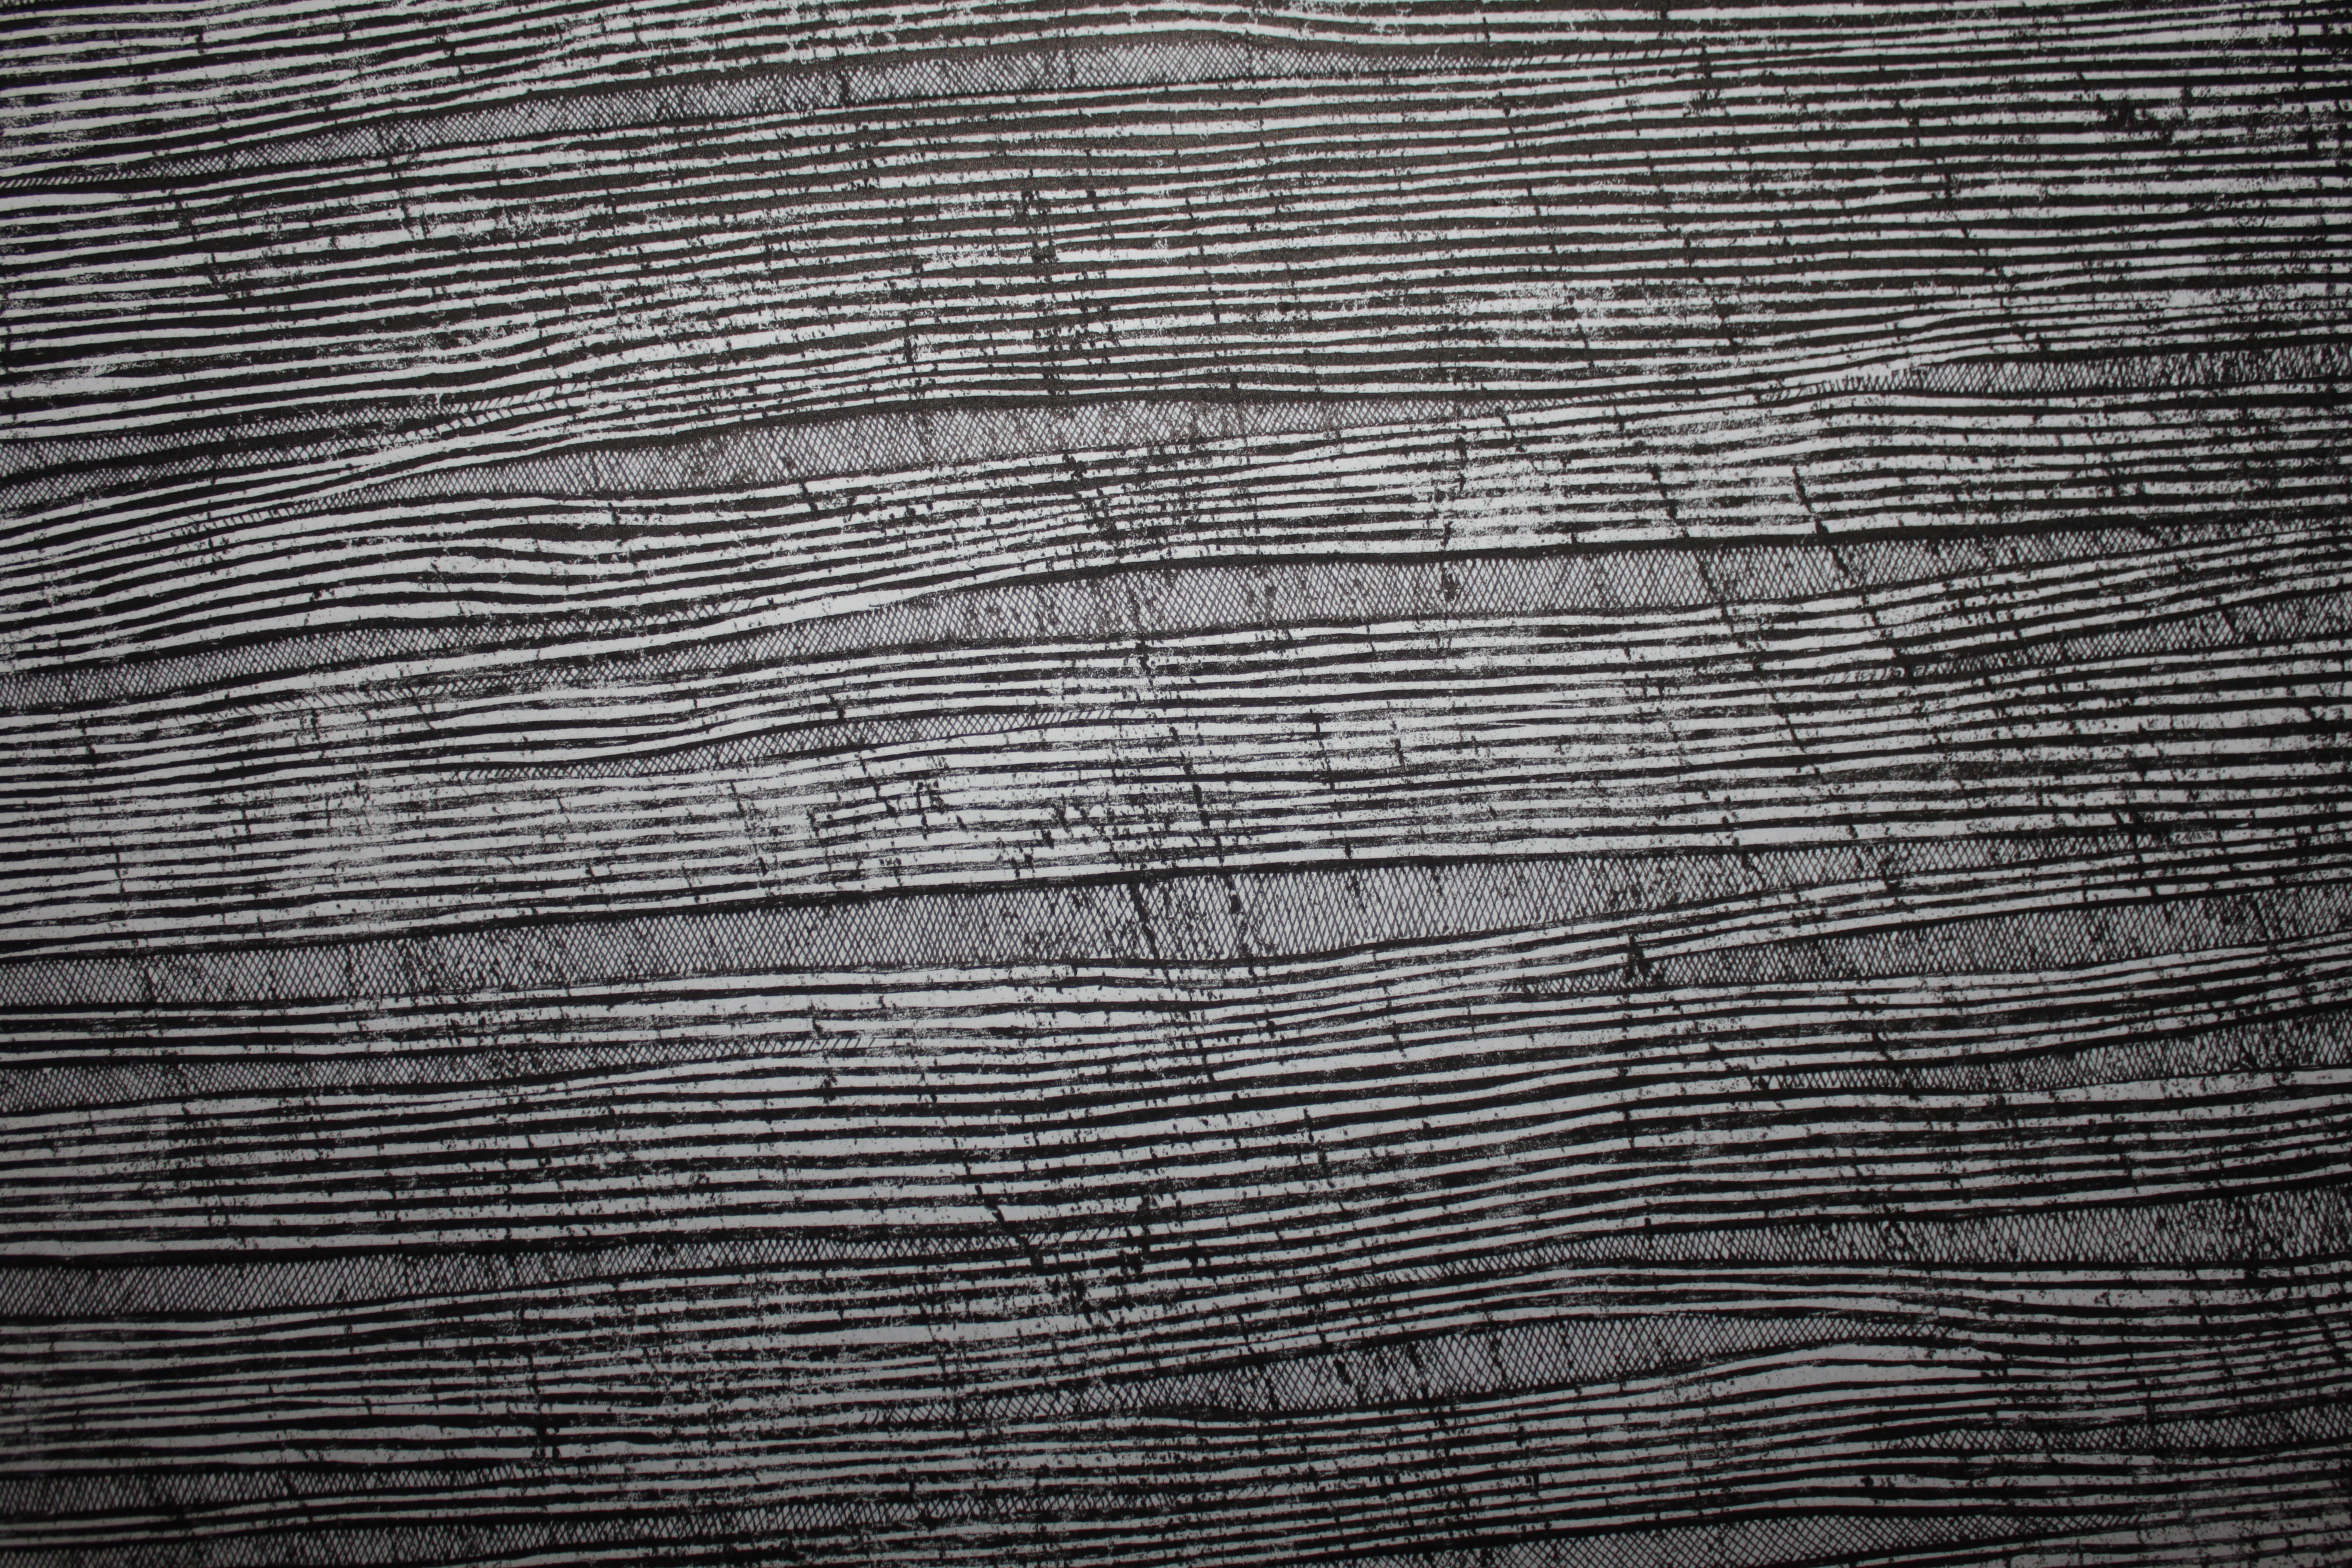   Locust 2 (detail).  2013. woodcut and concrete block relief with pen and ink on Japanese paper. 39 in x 26 in 